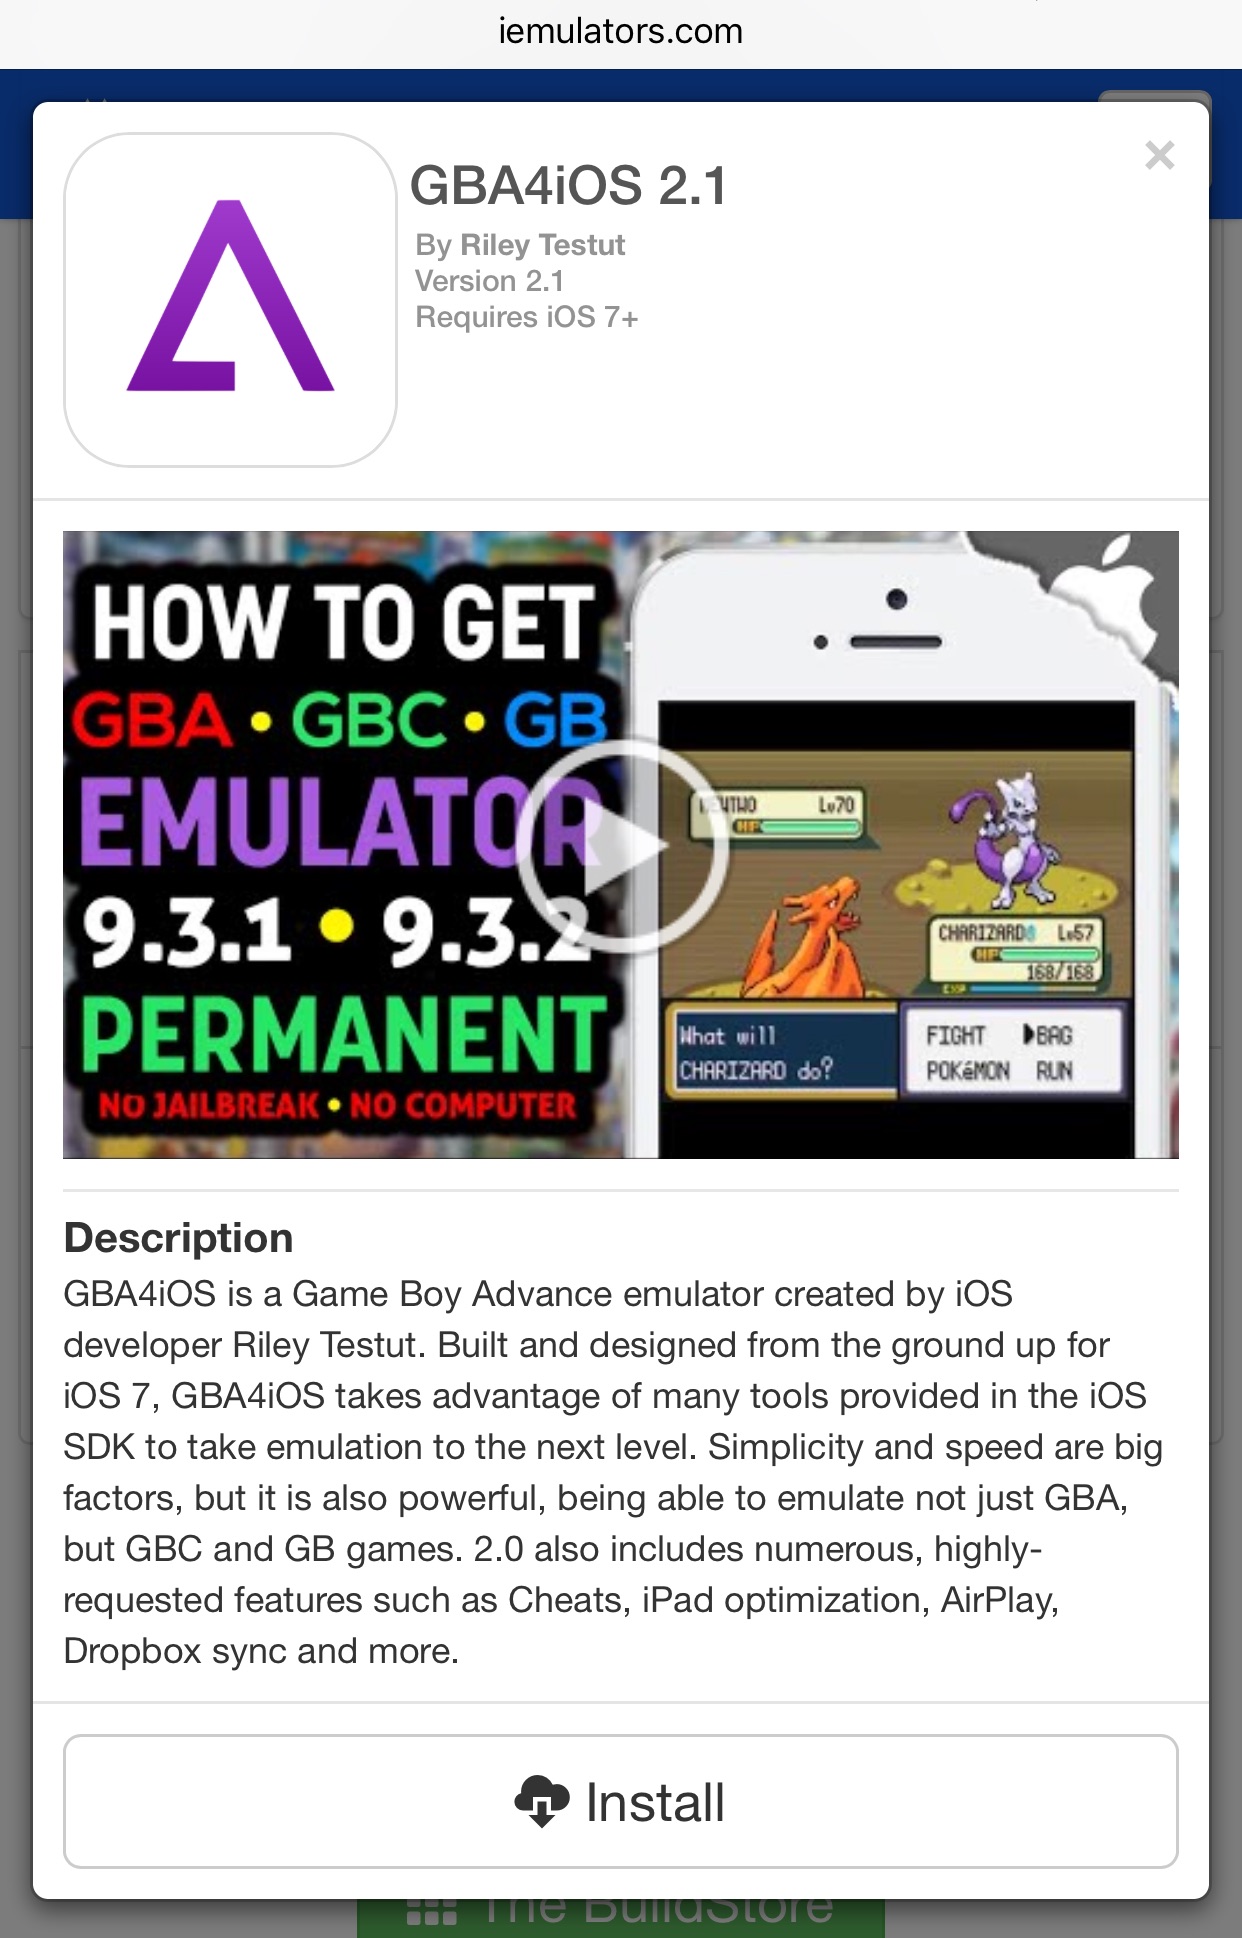 Install GBA Emulator On iOS 9.3, 9.3.1, 9.3.2 Without Jailbreak - Video How  To